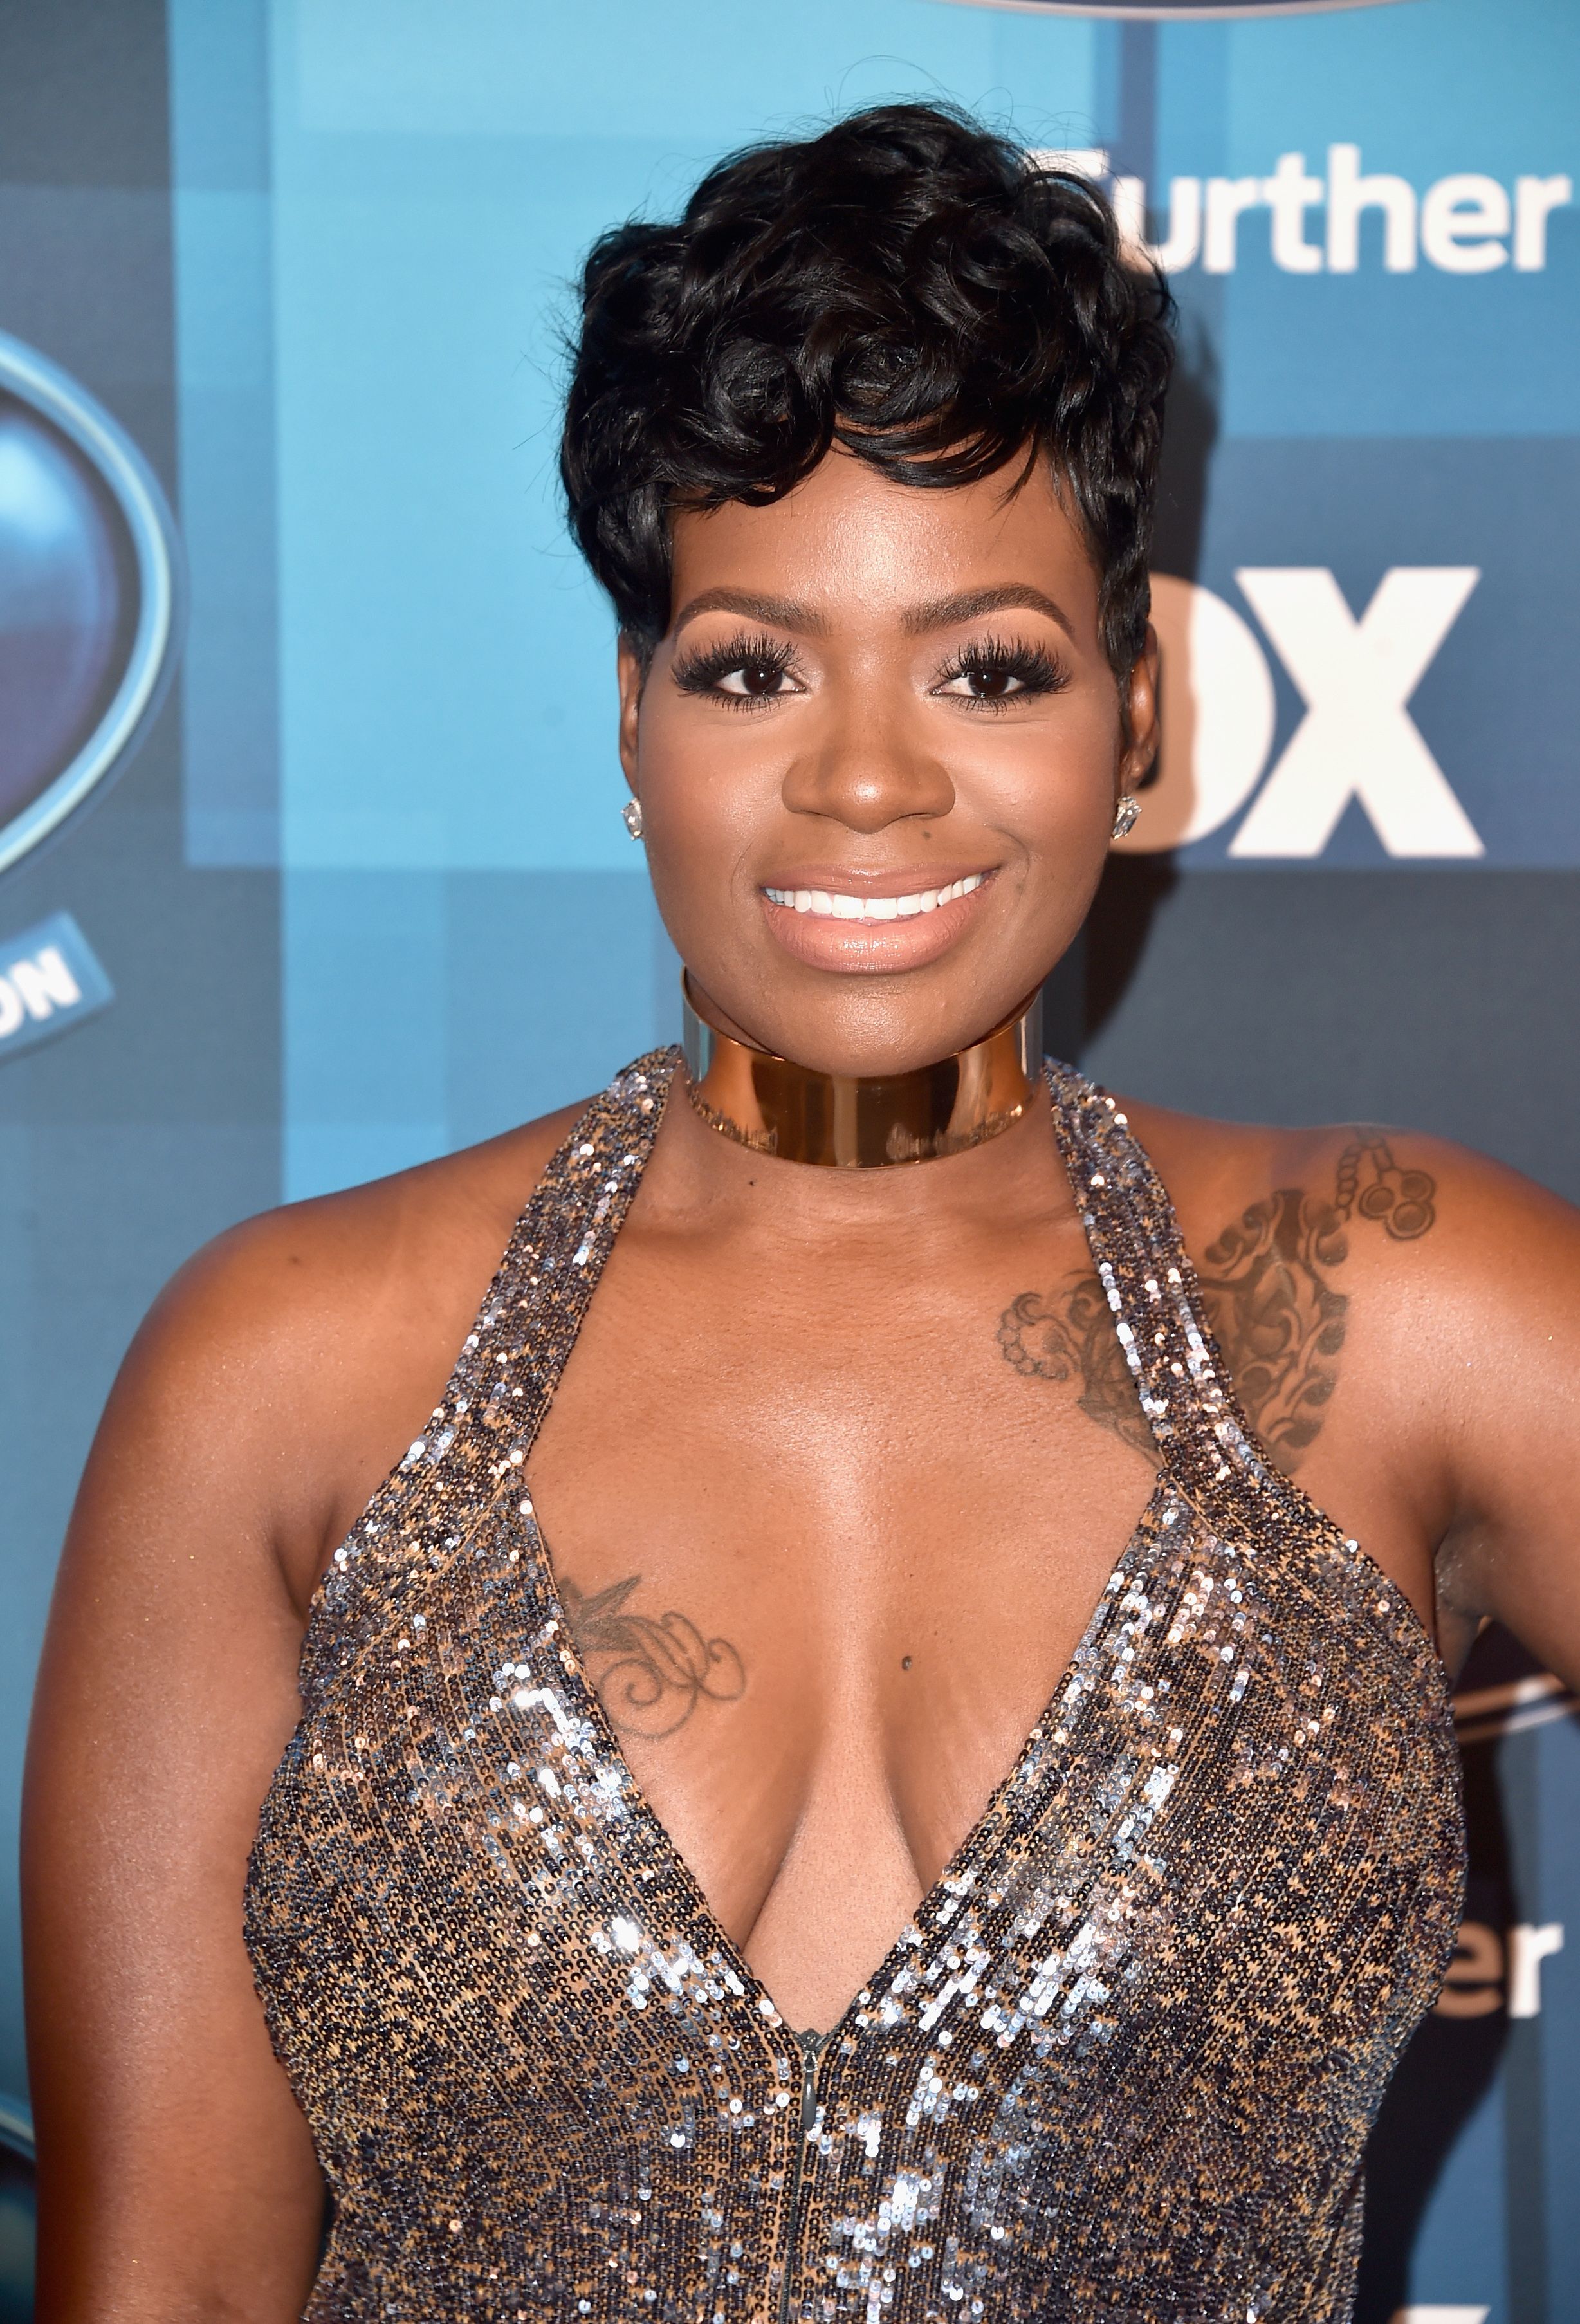 R&B singer Fantasia Barrino attends the 2016 "American Idol" Finale event at the Dolby Theatre in Hollywood, California. | Photo: Getty Images